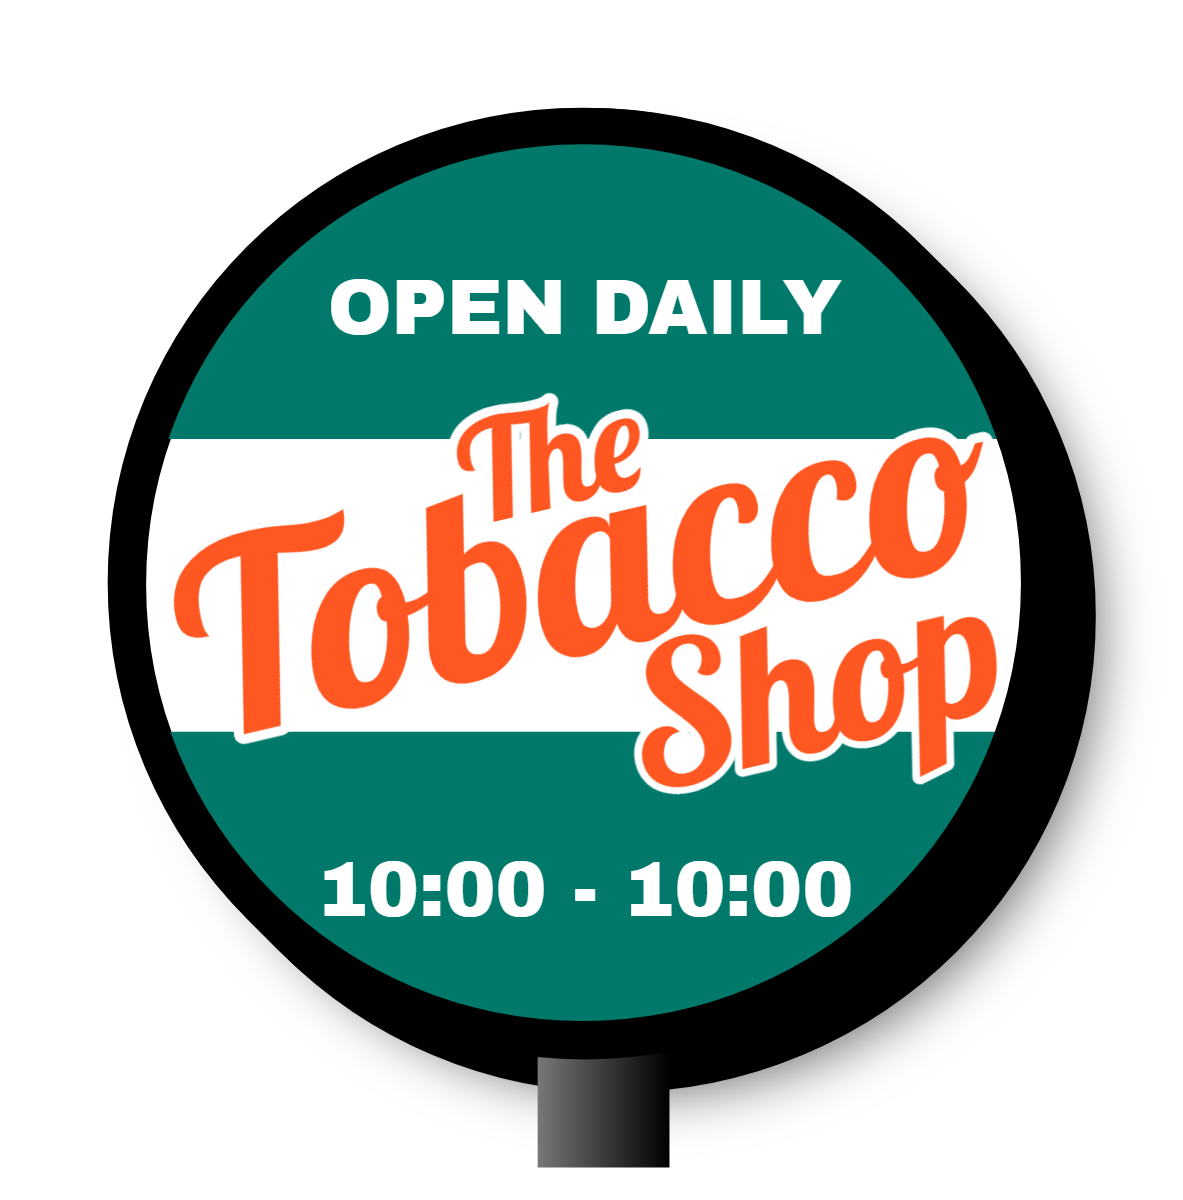 The Tobacco Shop Double Faced Lit Shaped Cabinet Sign